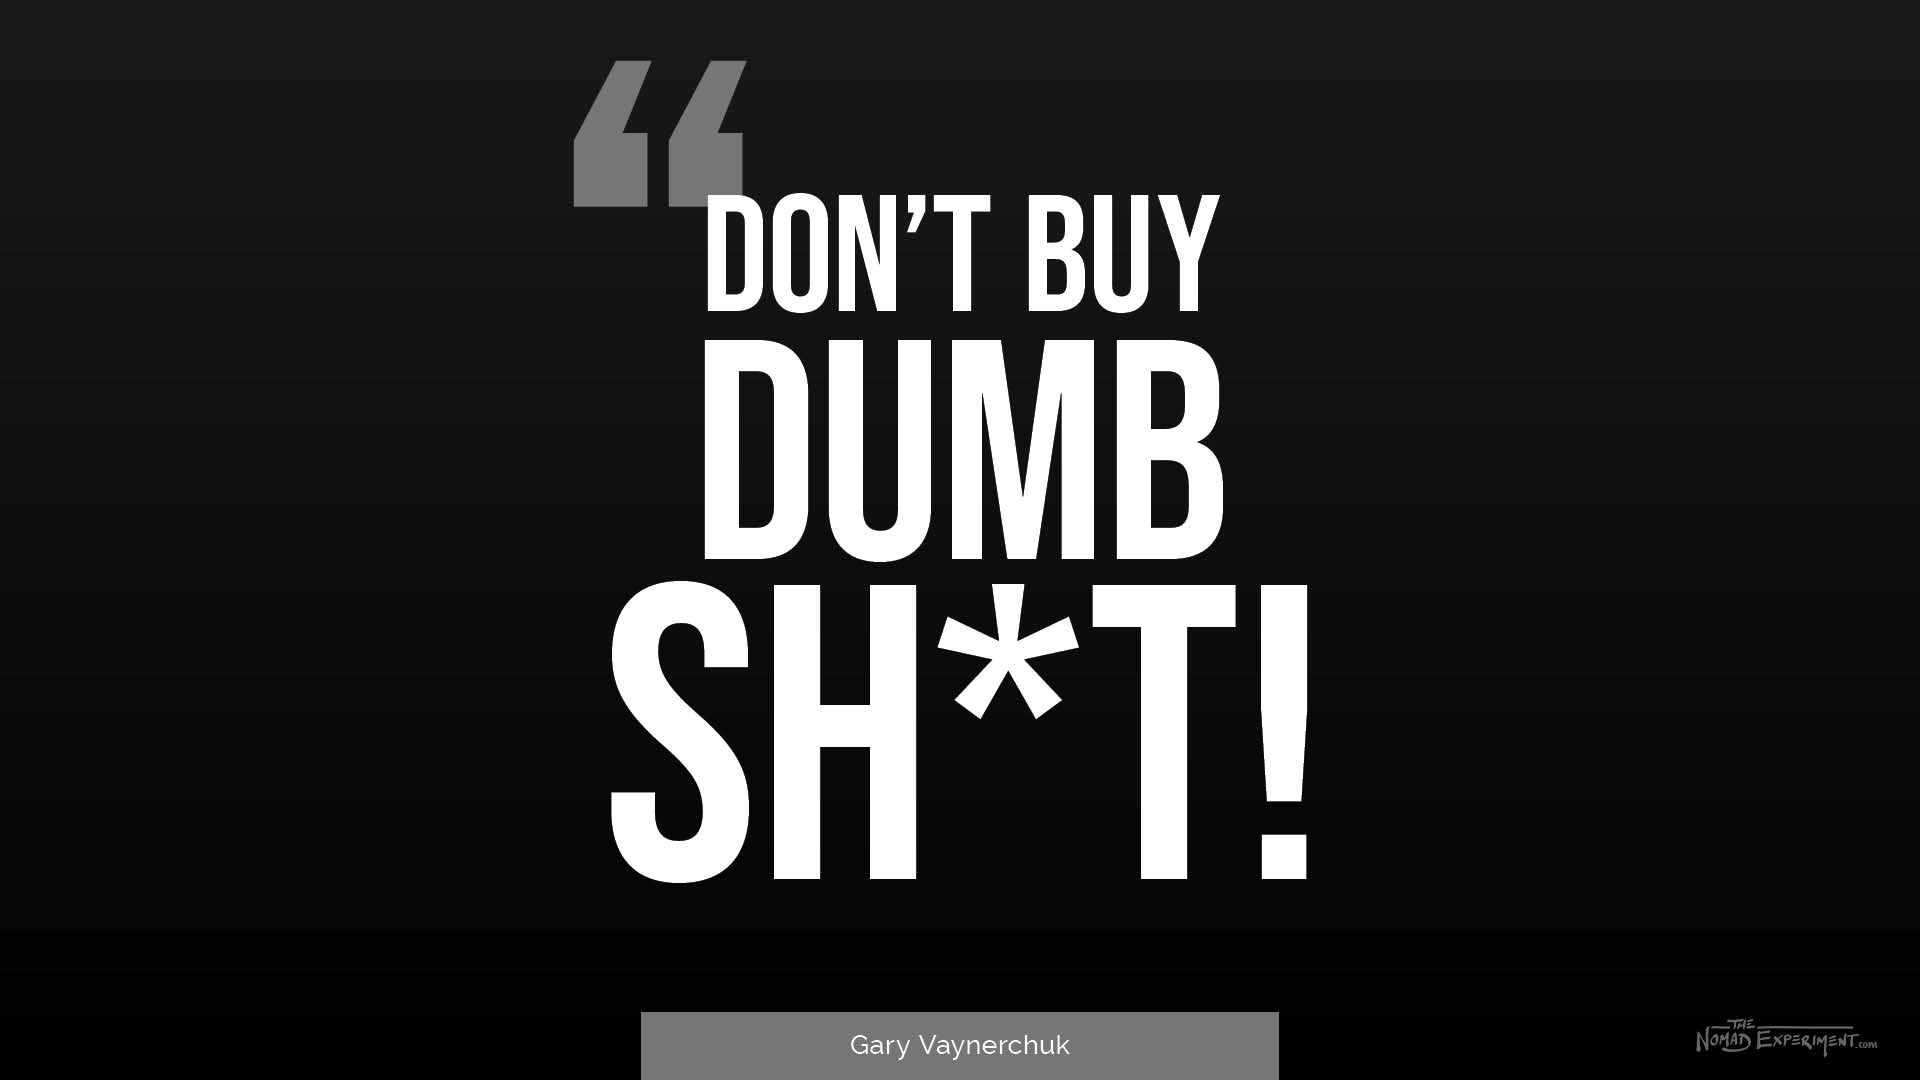 Gary Vaynerchuk quote don't buy dumb shit - The Nomad Experiment